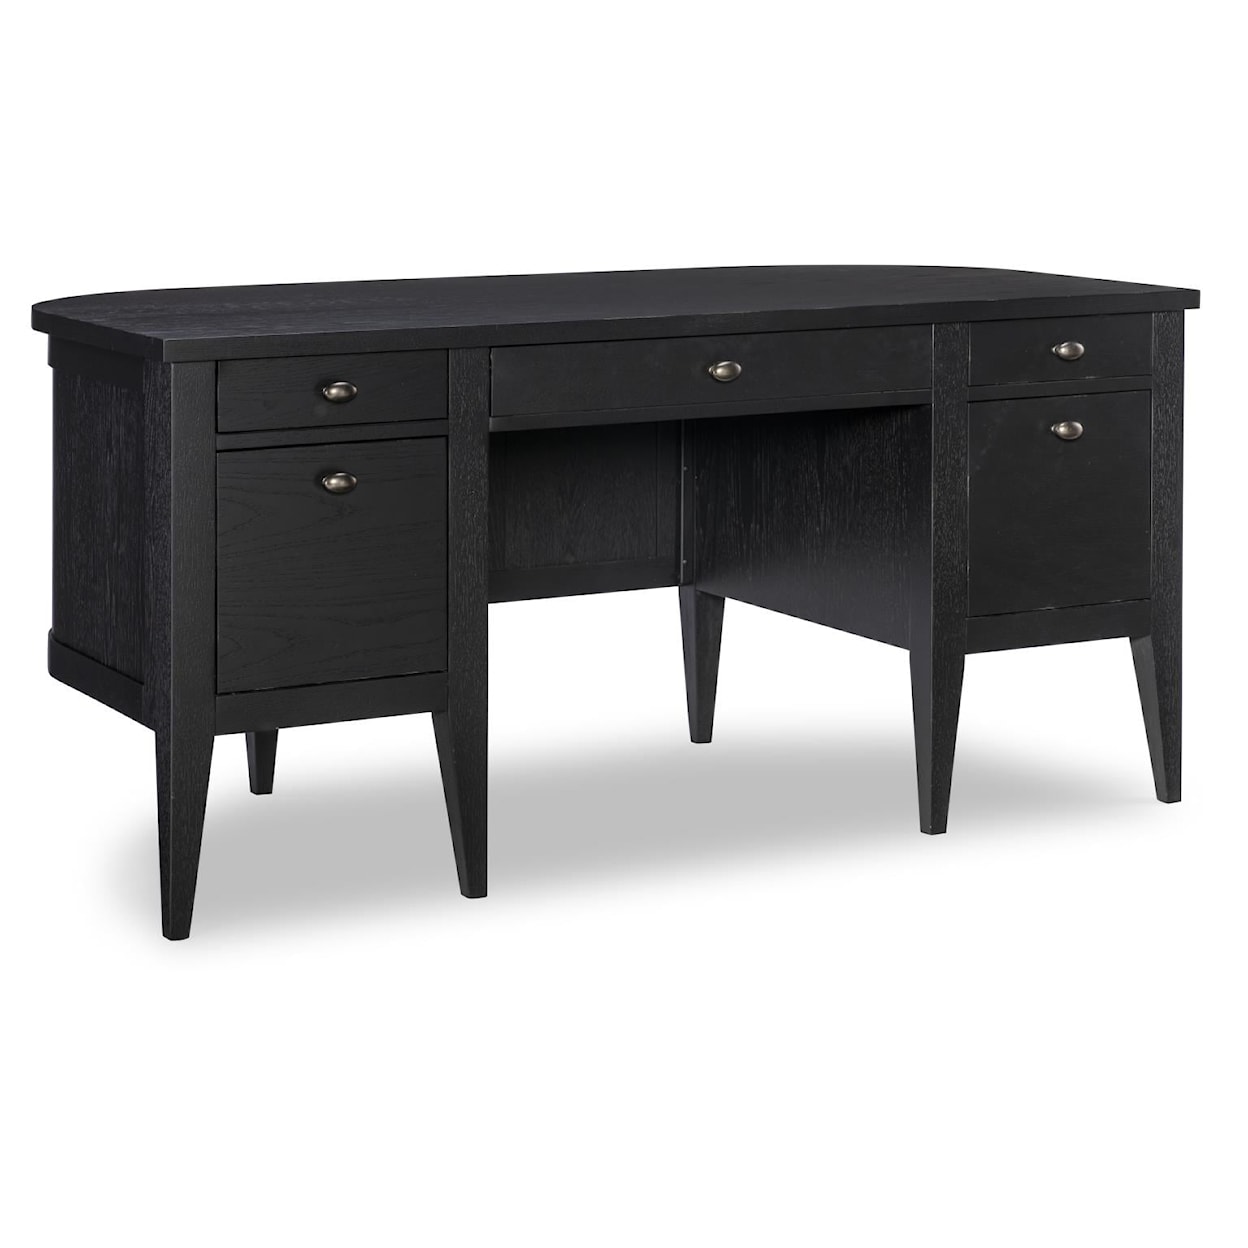 Trisha Yearwood Home Collection by Legacy Classic Today's Traditions Desk